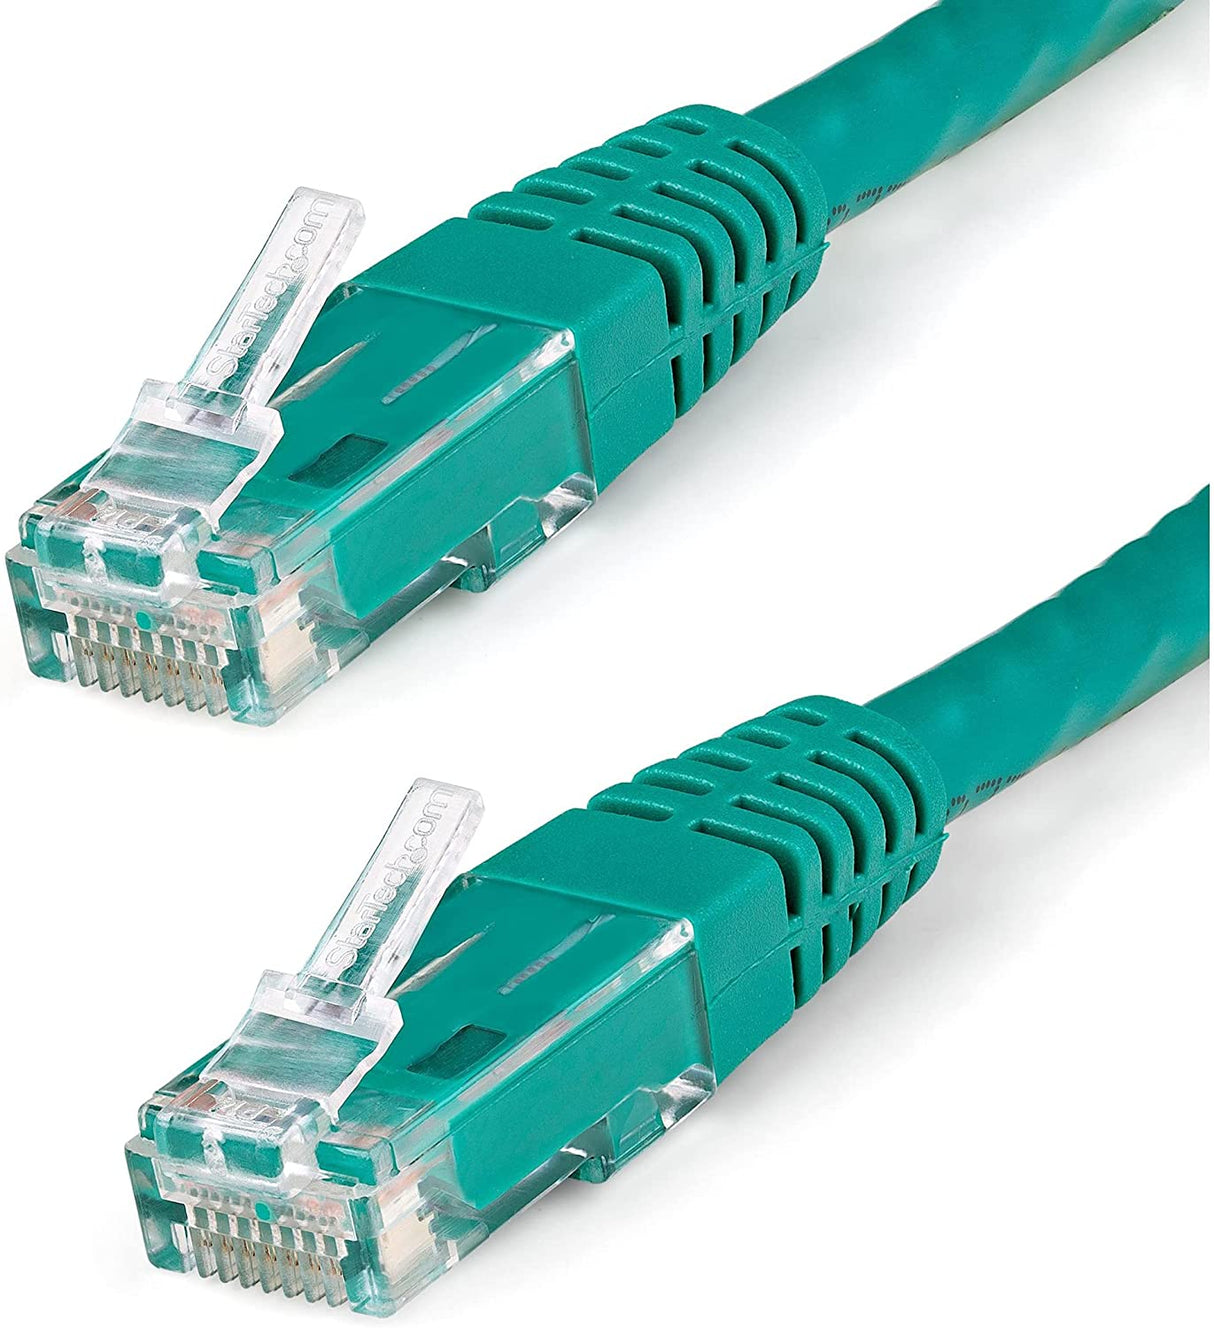 StarTech.com 50ft CAT6 Ethernet Cable - Green CAT 6 Gigabit Ethernet Wire -650MHz 100W PoE++ RJ45 UTP Molded Category 6 Network/Patch Cord w/Strain Relief/Fluke Tested UL/TIA Certified (C6PATCH50GN) Green 50 ft / 15 m 1 Pack